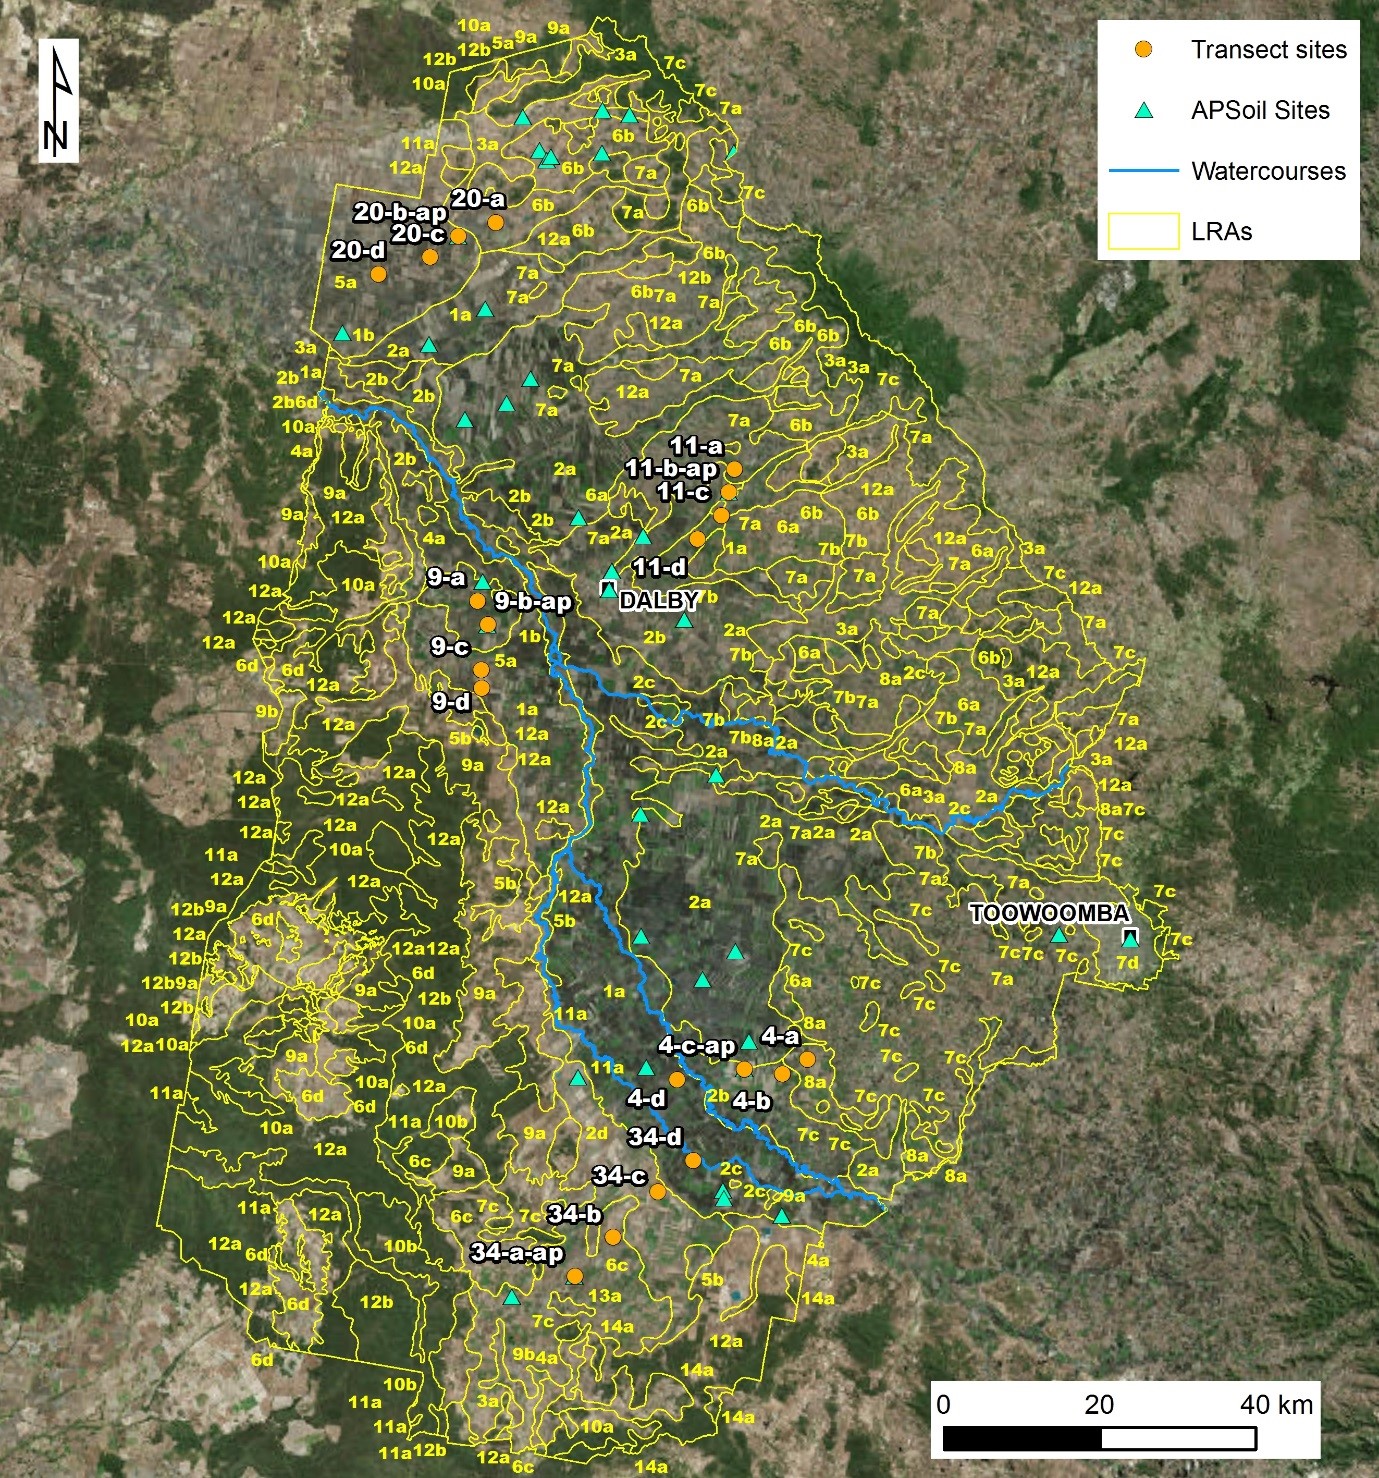 This photo shows the survey transects and sampling points (orange dots) overlaid on LRA mapping